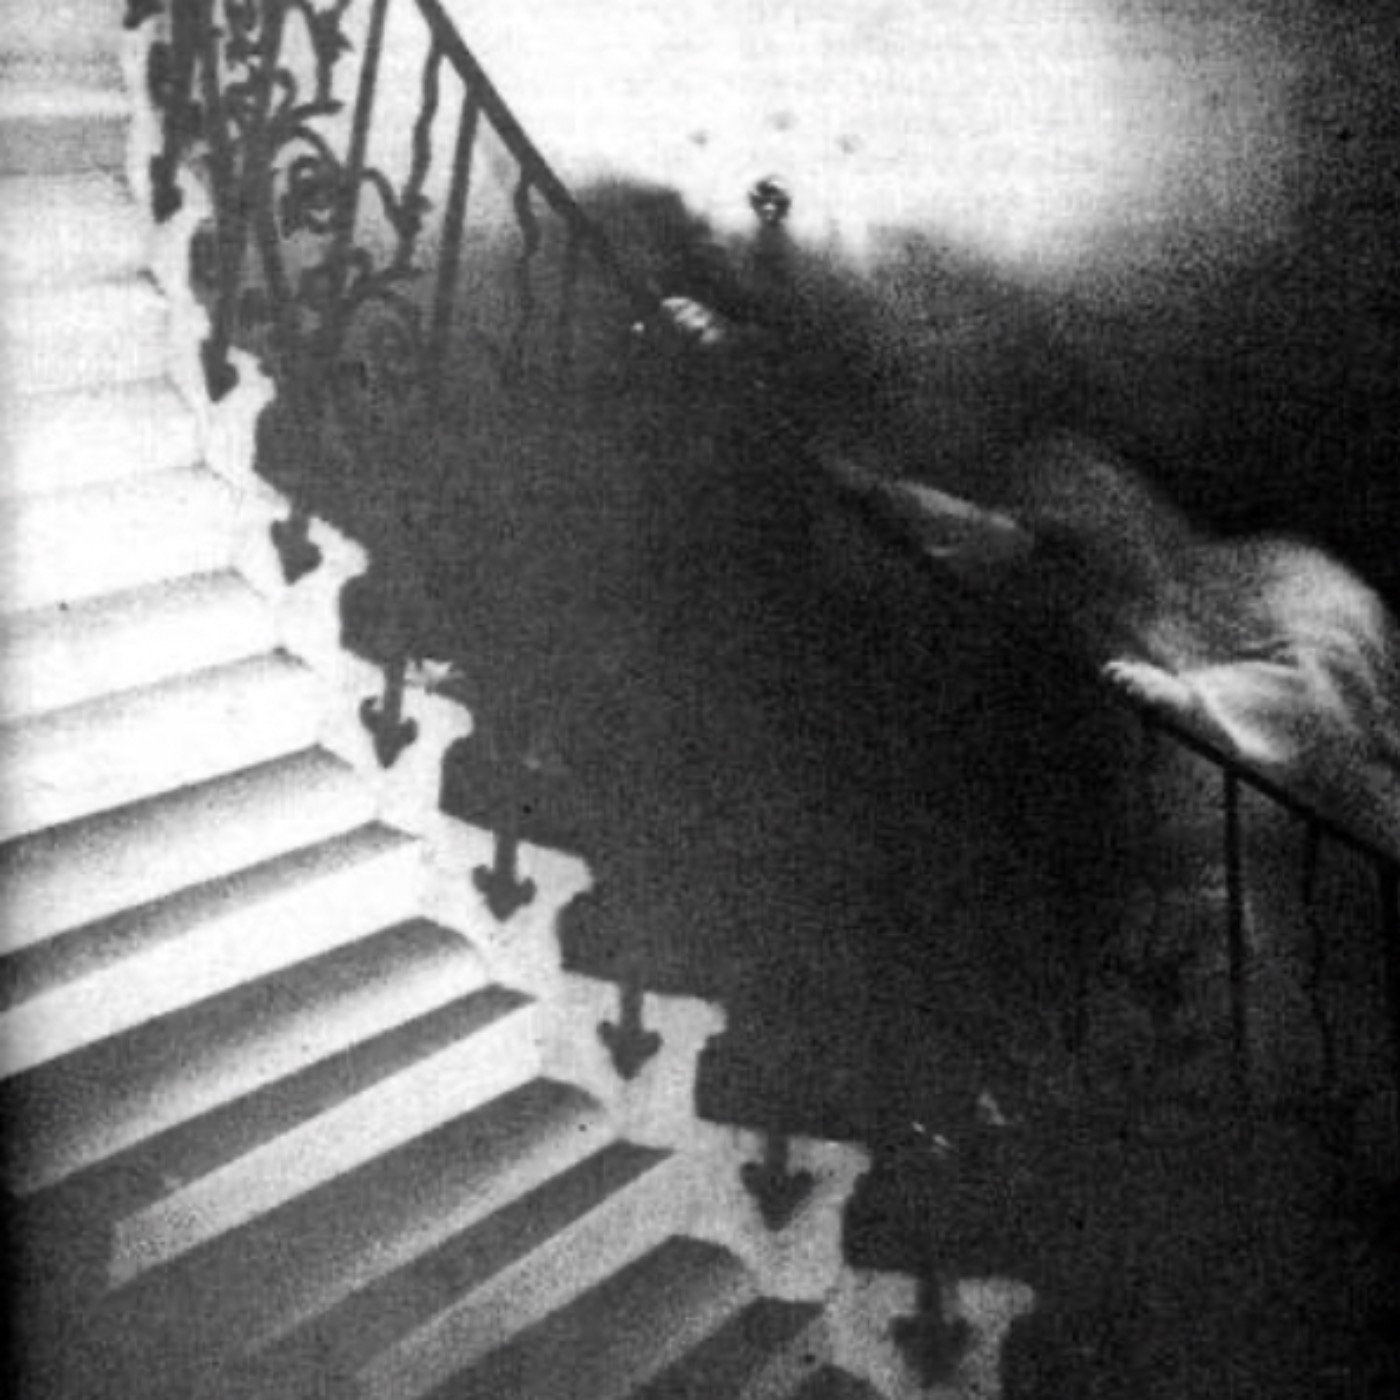 #367 The Best Ghost Photo Ever Taken? - The Queen's House